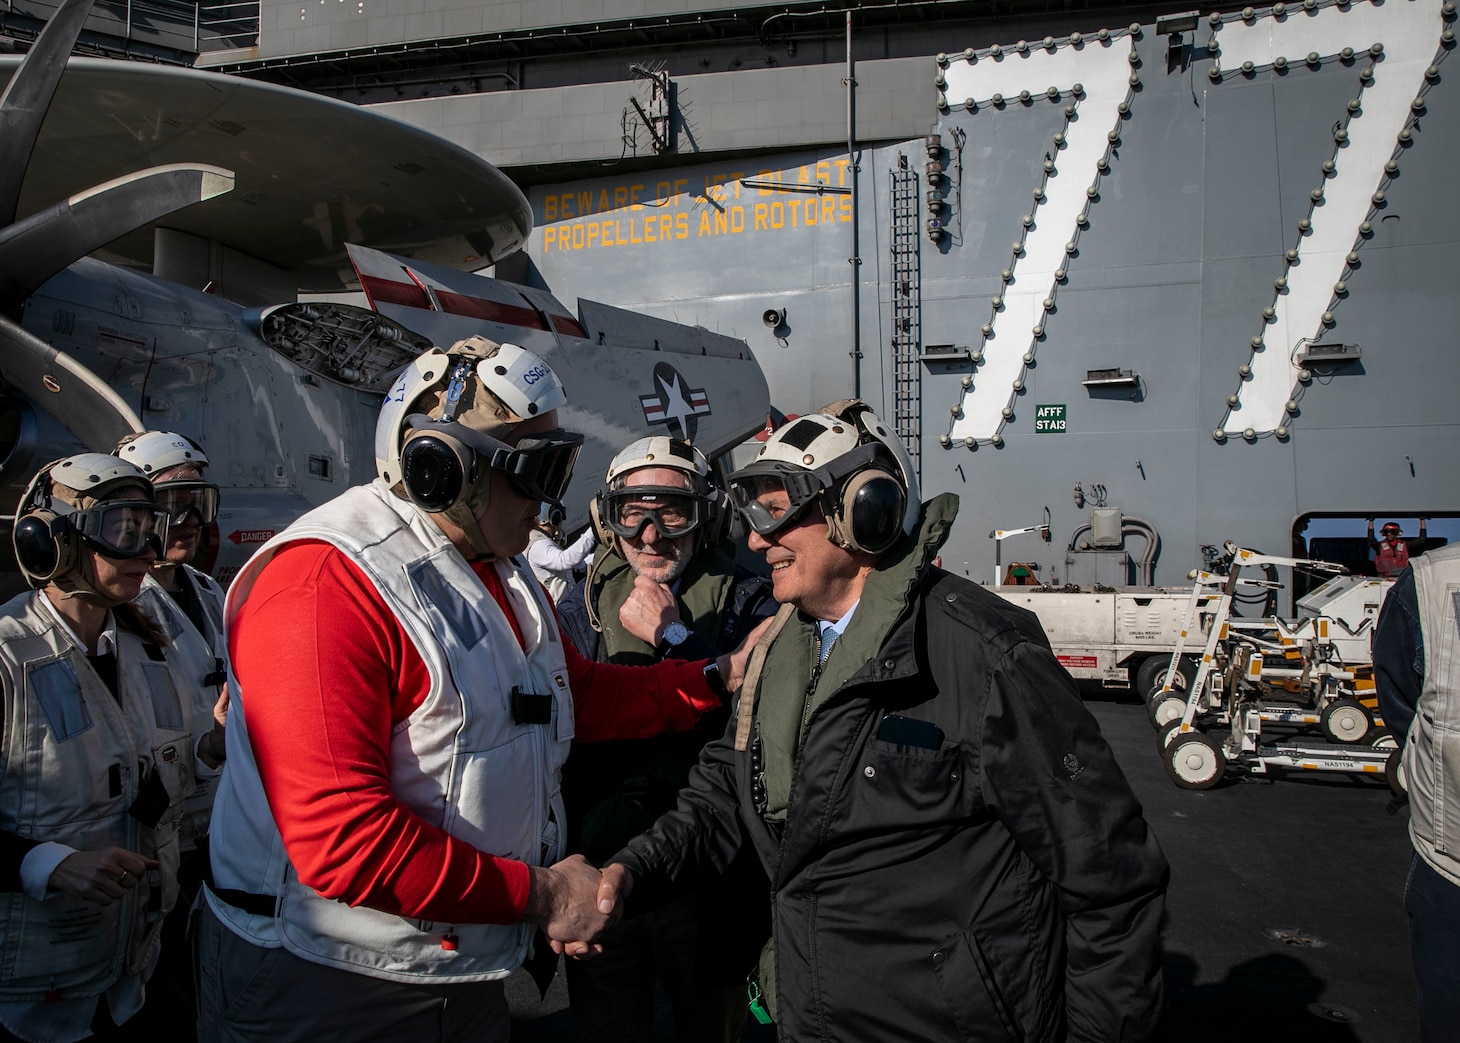 (March 23, 2023) Rear. Adm. Dennis Velez, commander, Carrier Strike Group (CSG) 10, left, welcomes President of the Sicilian Region Renato Schifani, on the flight deck of the Nimitz-class aircraft carrier USS George H.W. Bush (CVN 77), March 23, 2023. The George H.W. Bush CSG is on a scheduled deployment in the U.S. Naval Forces Europe area of operations, employed by U.S. Sixth Fleet to defend U.S., allied and partner interests.